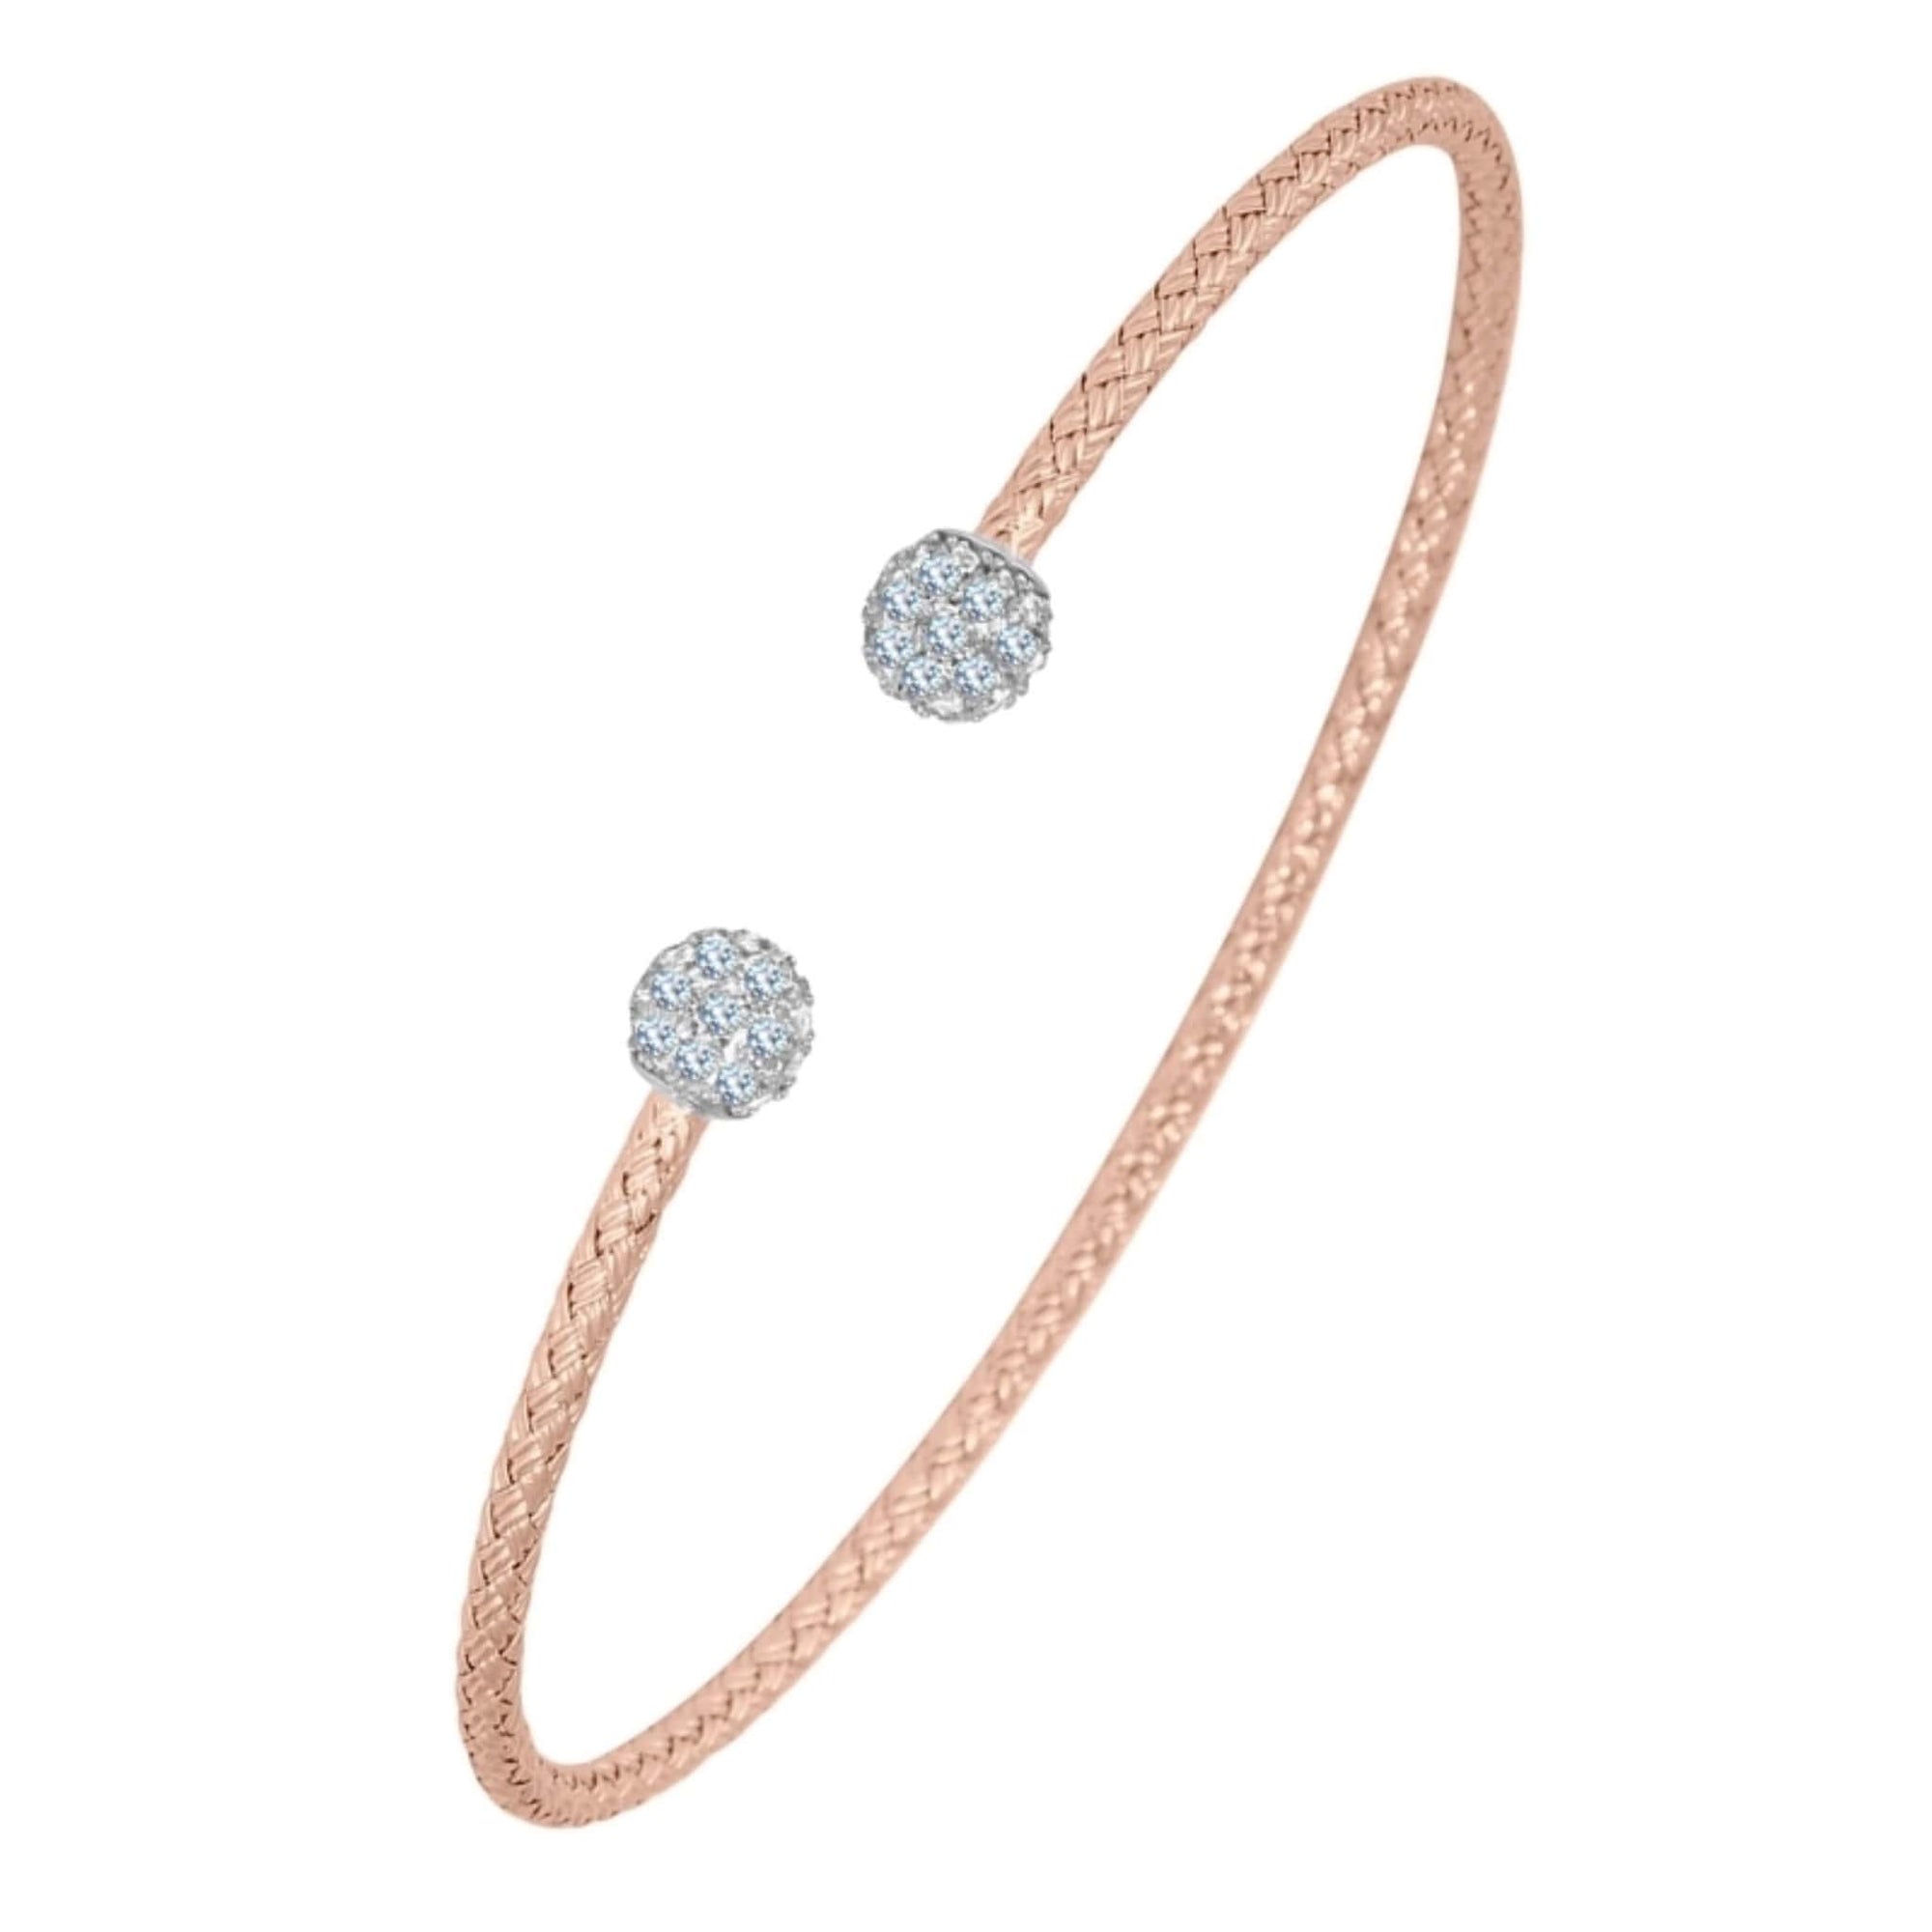 Charles Garnier "Esther" Woven Rose Cuff Bangle Bracelet at Arman's Jewellers